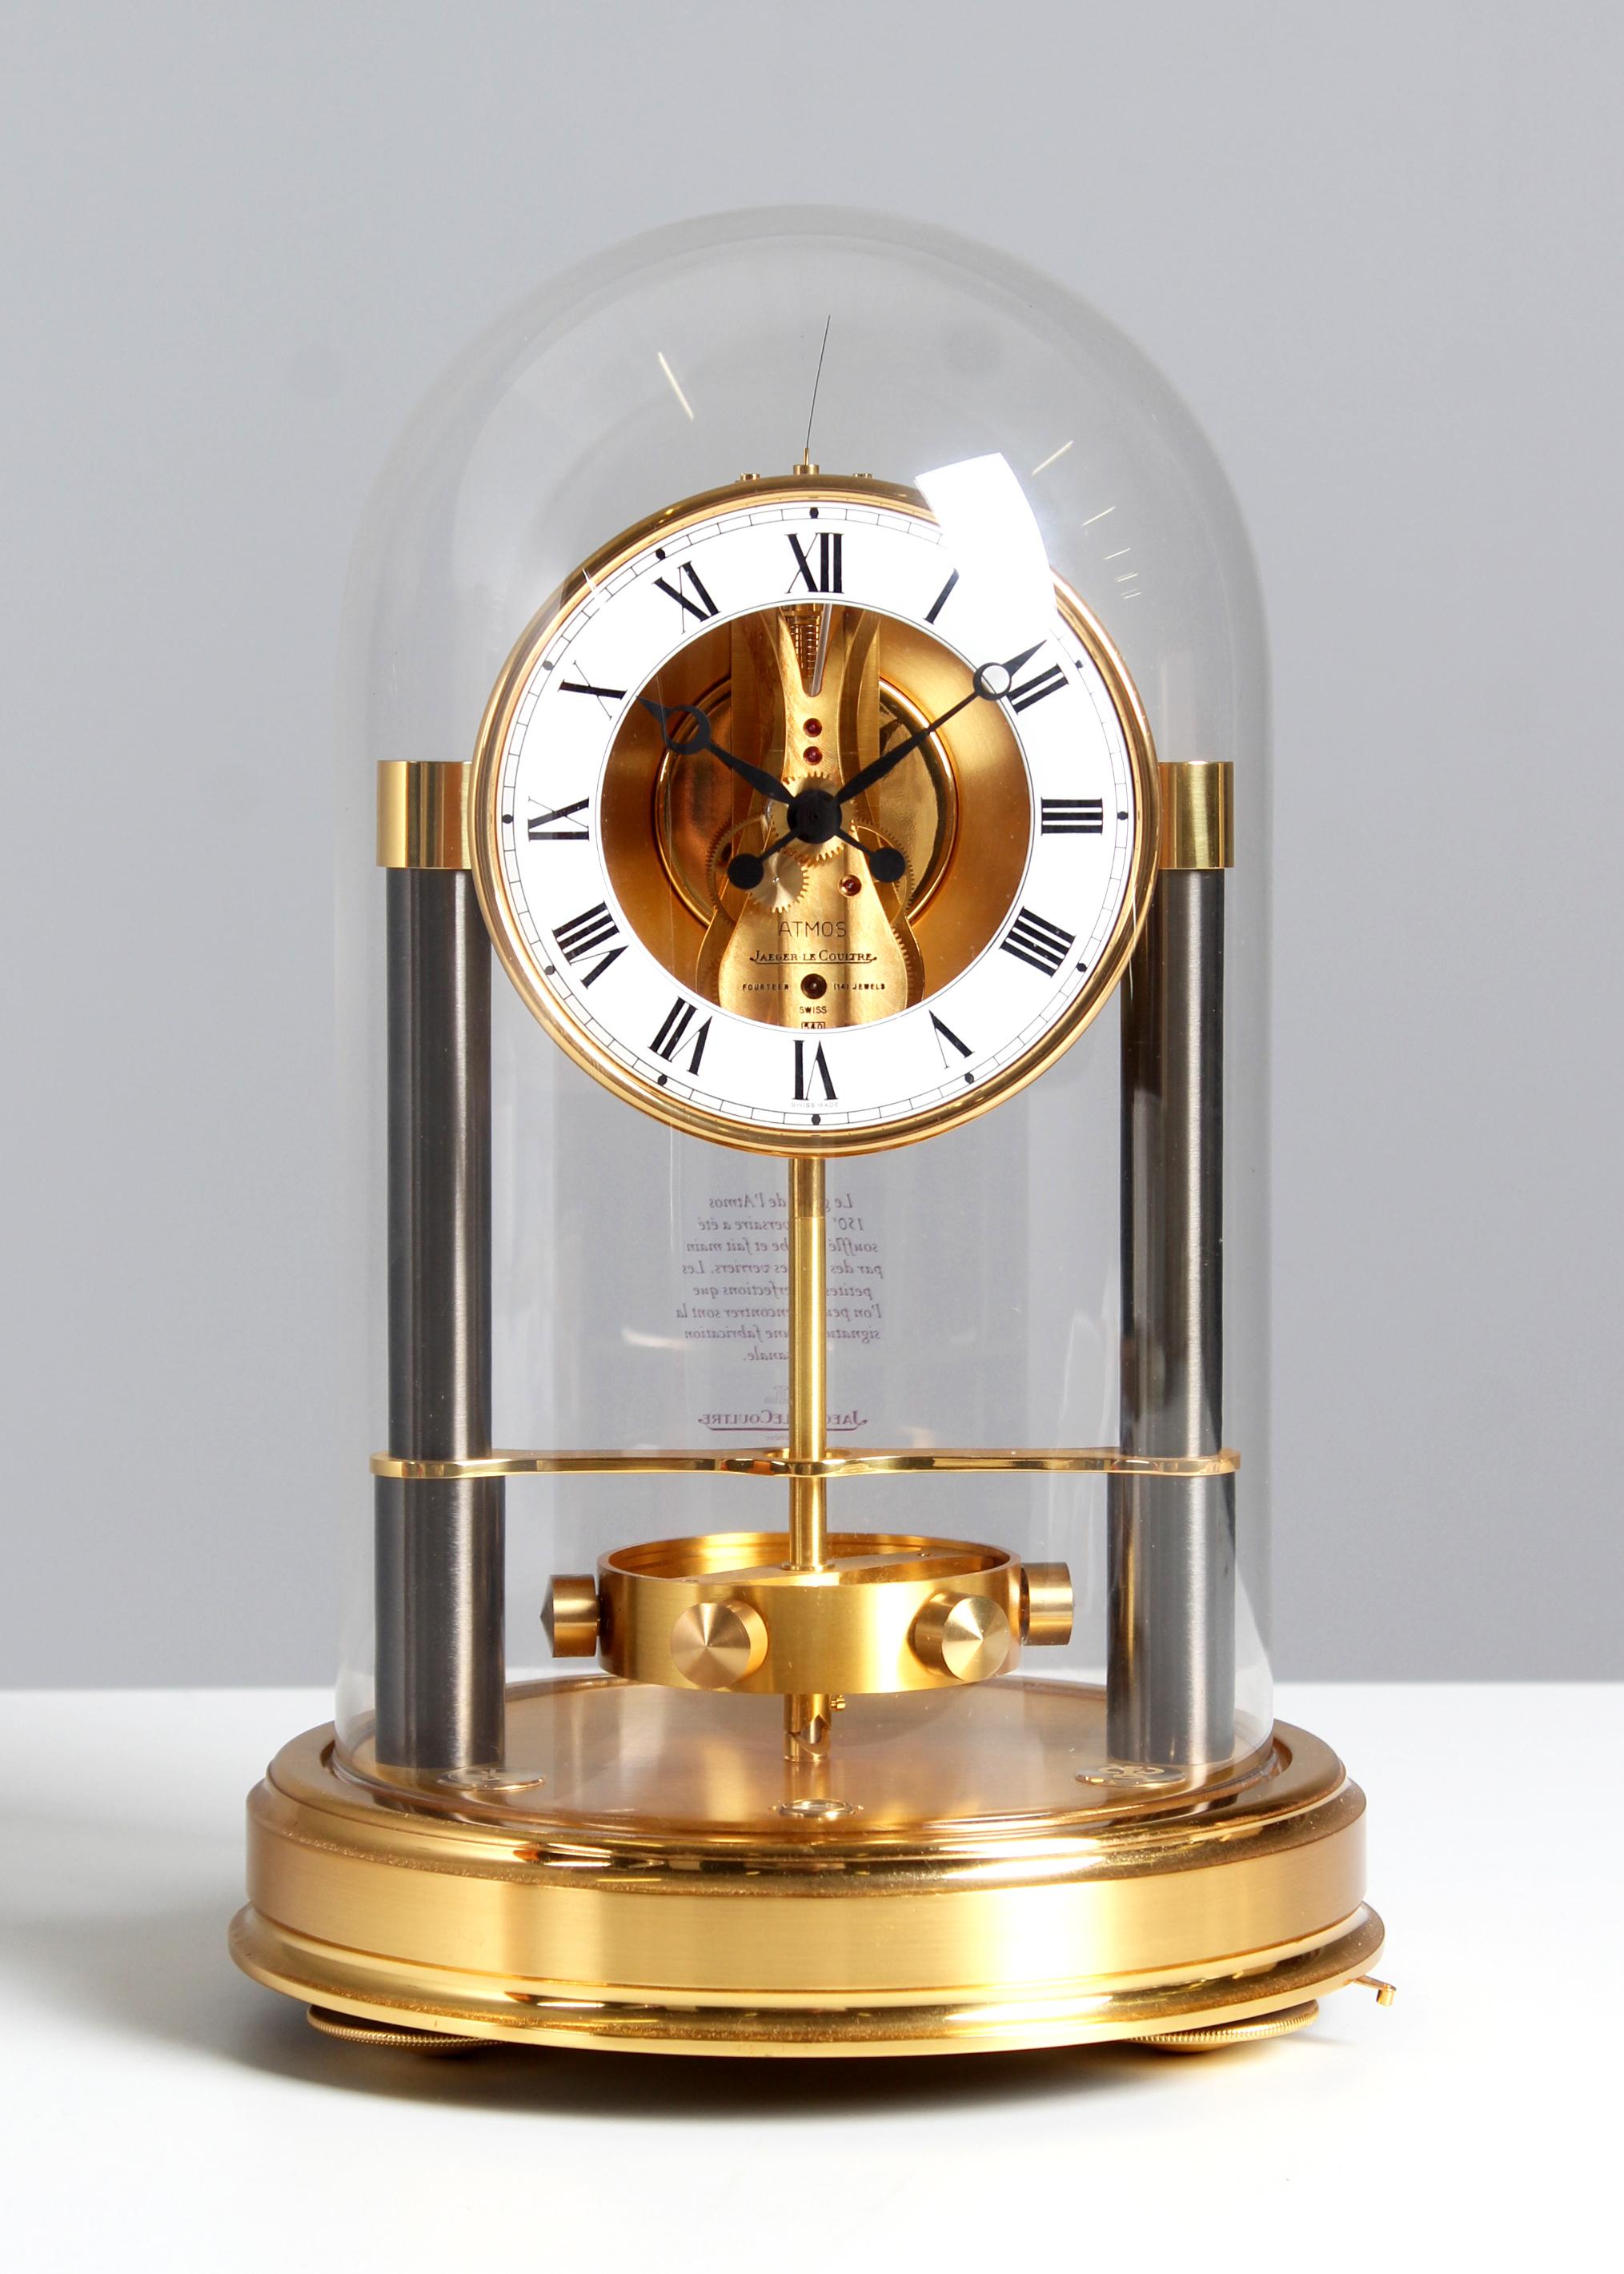 Jaeger LeCoultre - Atmos 150th Anniversary with box and papers

Jaeger LeCoultre Switzerland
Brass, glass, enamel
Year of manufacture 1987

Dimensions: H x D: 34 x 22 cm

Description:
Fine and rare Atmos clock, which was produced in a limited